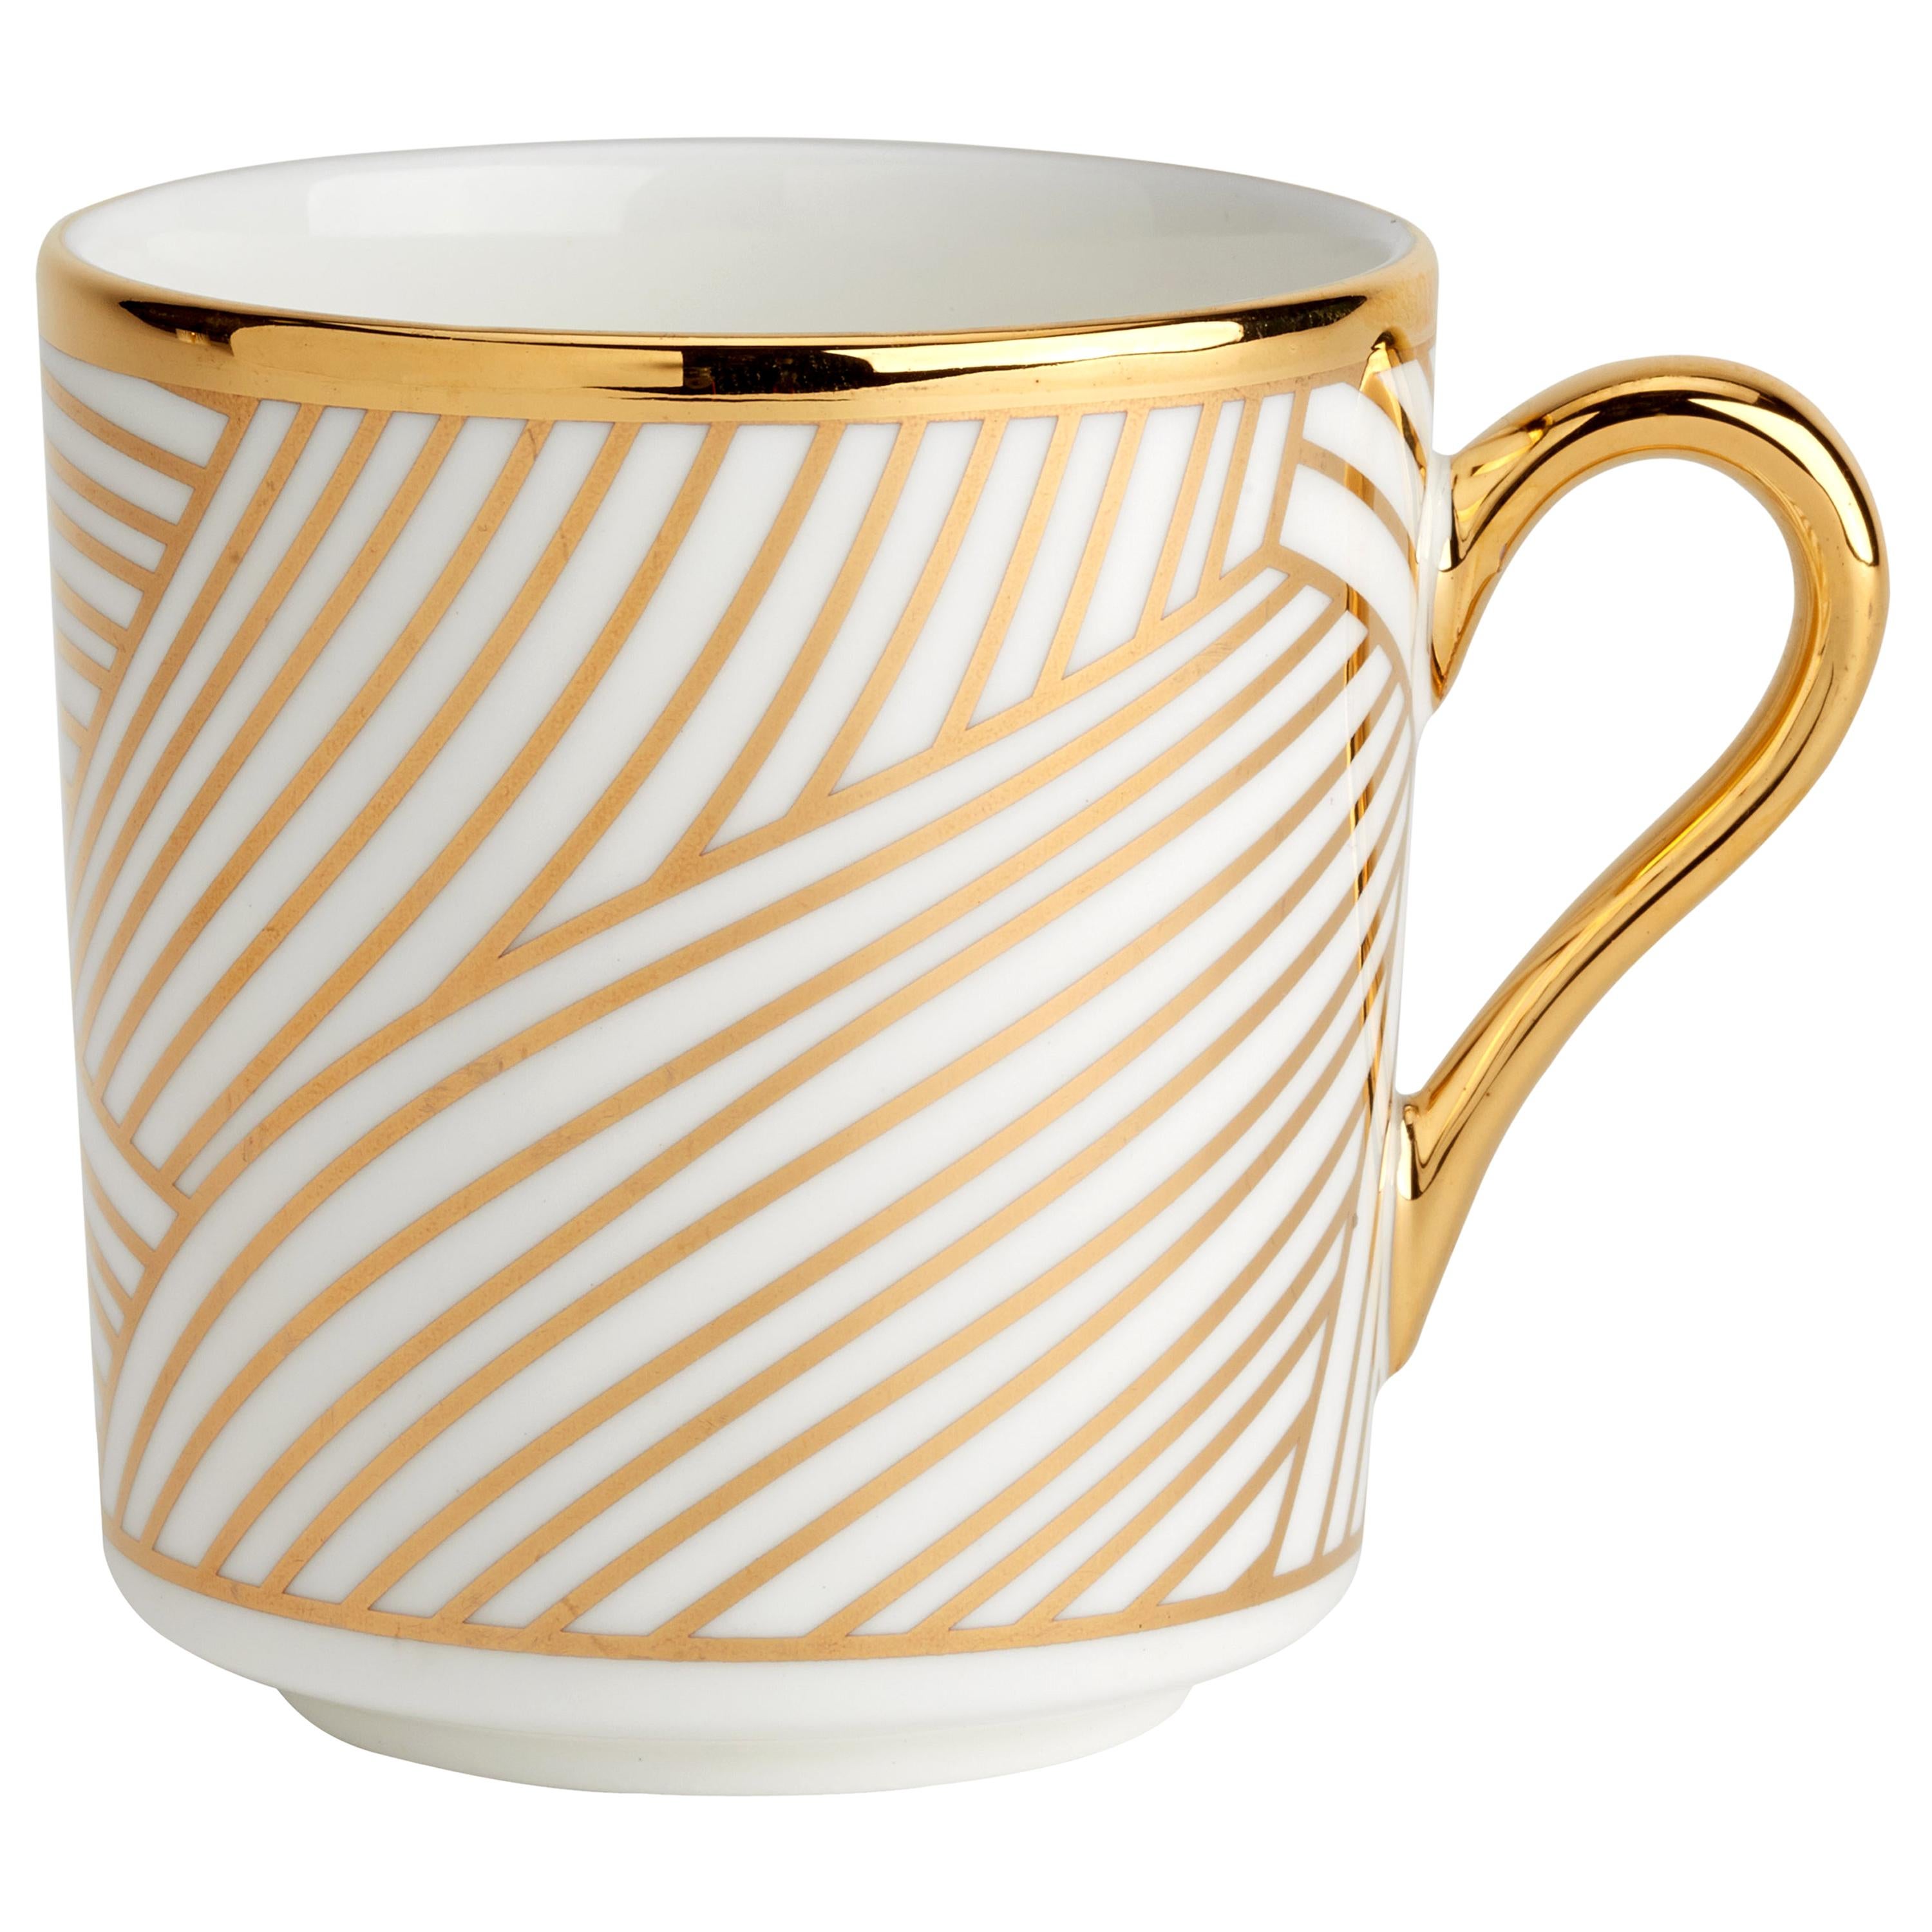 Bone China Espresso Cup with 22-Carat Gold and Black Decals